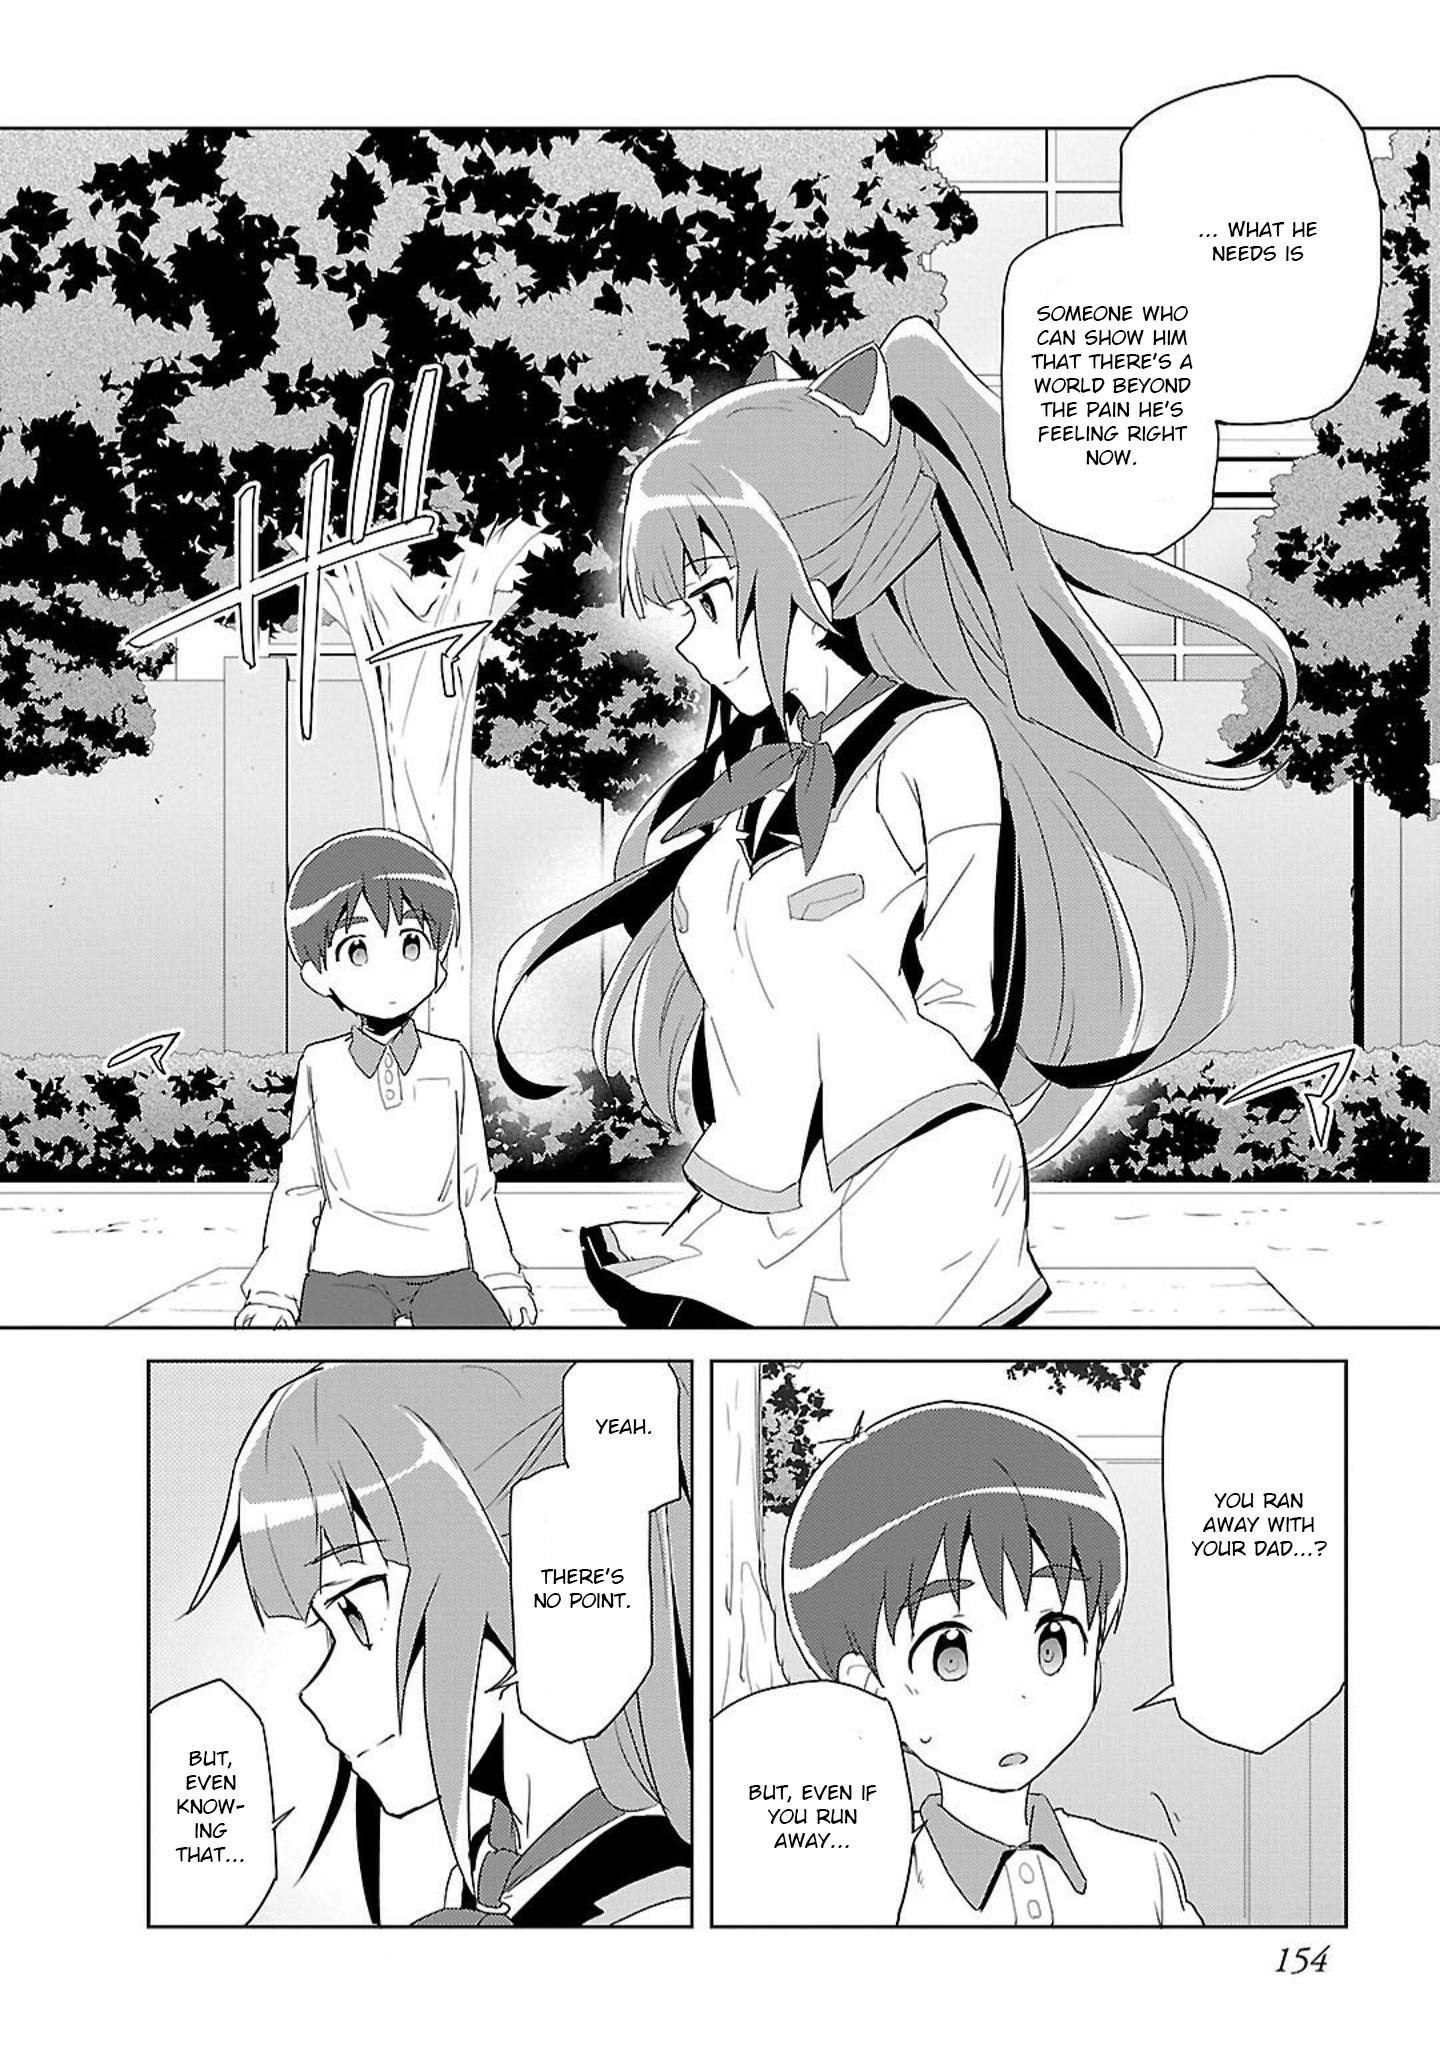 Plastic Memories - Say To Good-Bye Vol.2 Chapter 11: Memories: 11 - Picture 2